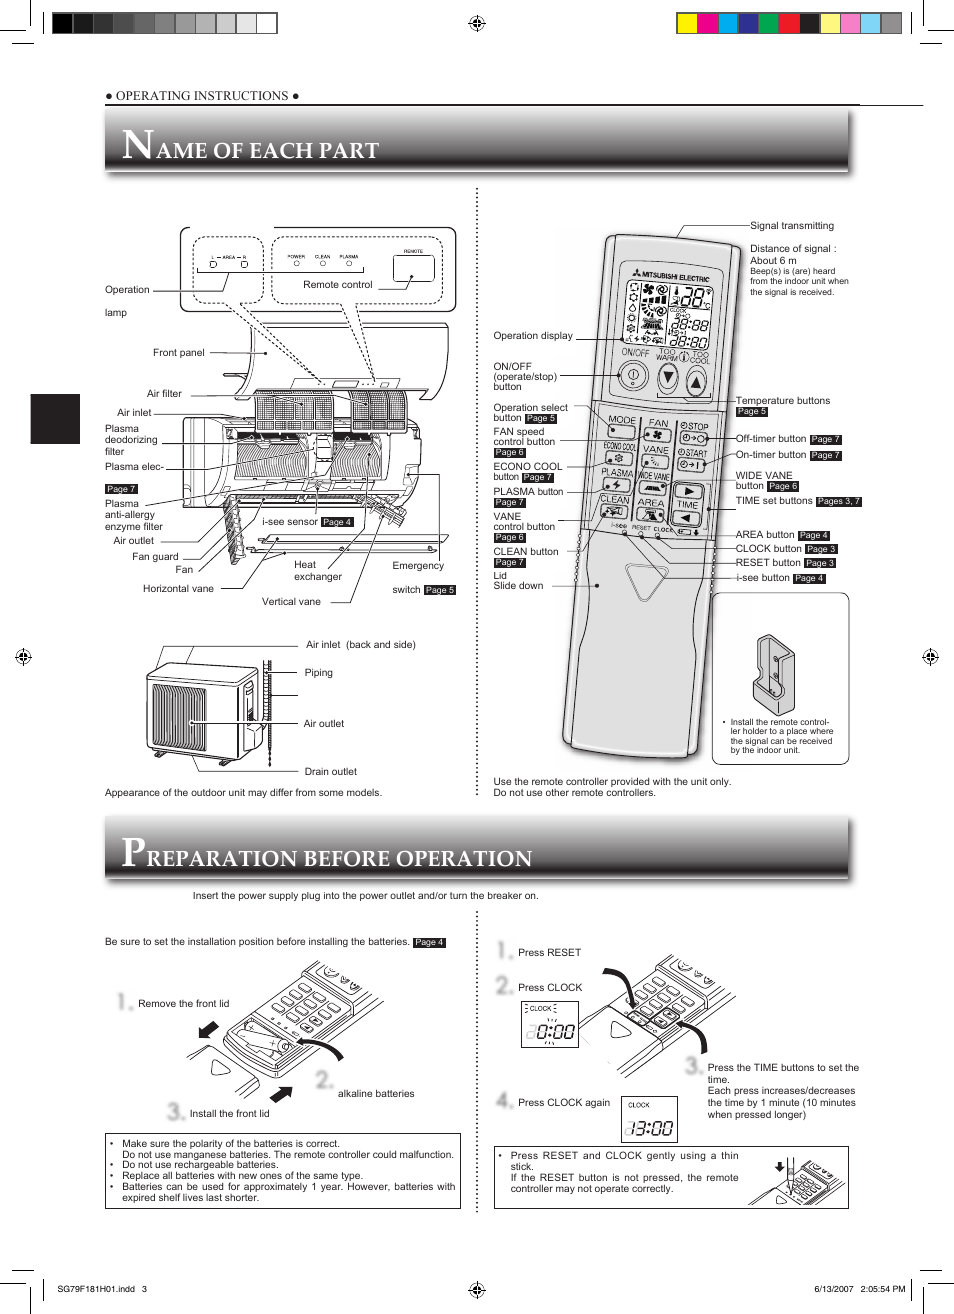 Ame of each part, Reparation before operation 1, Indoor unit remote  controller | MITSUBISHI ELECTRIC MSZ-FD25VA User Manual | Page 4 / 12 |  Original mode